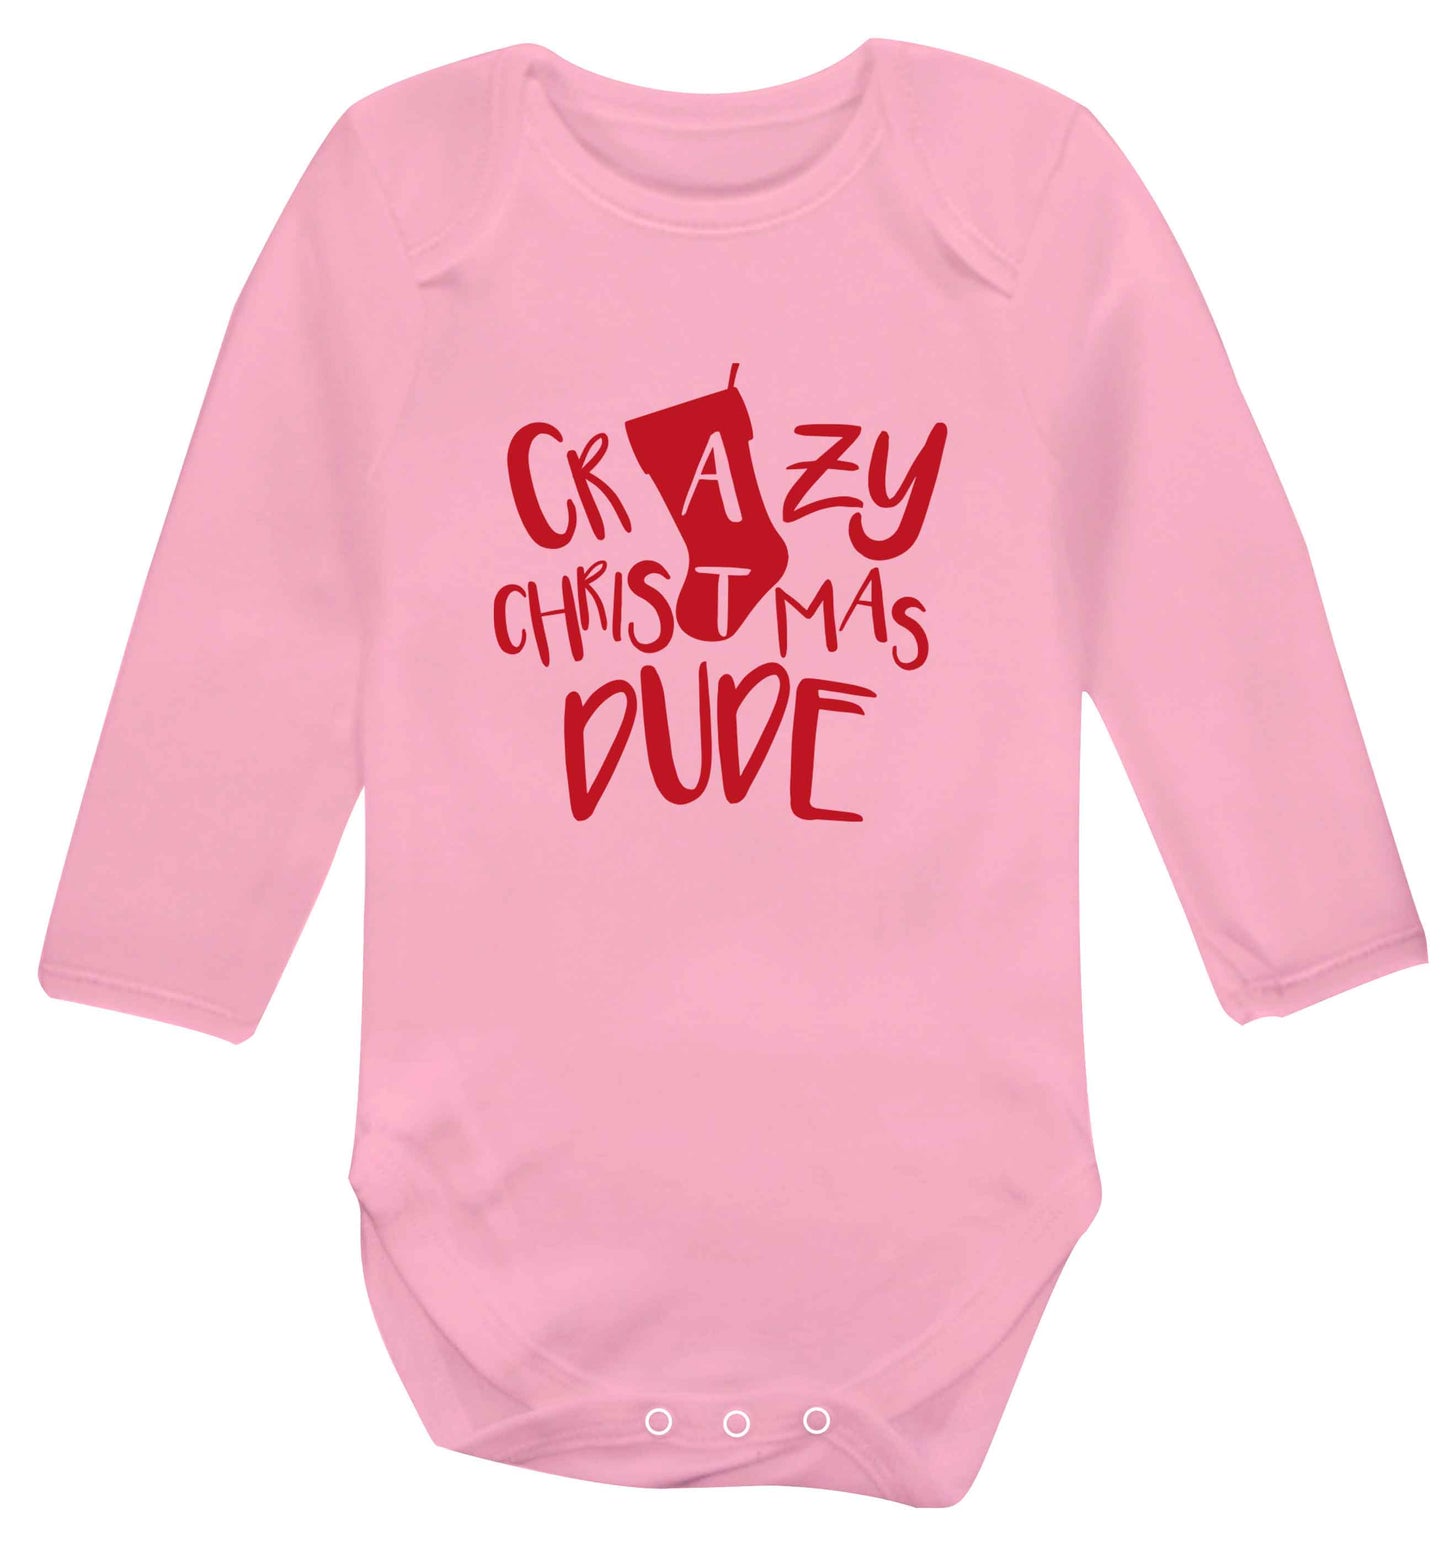 Crazy Christmas Dude baby vest long sleeved pale pink 6-12 months